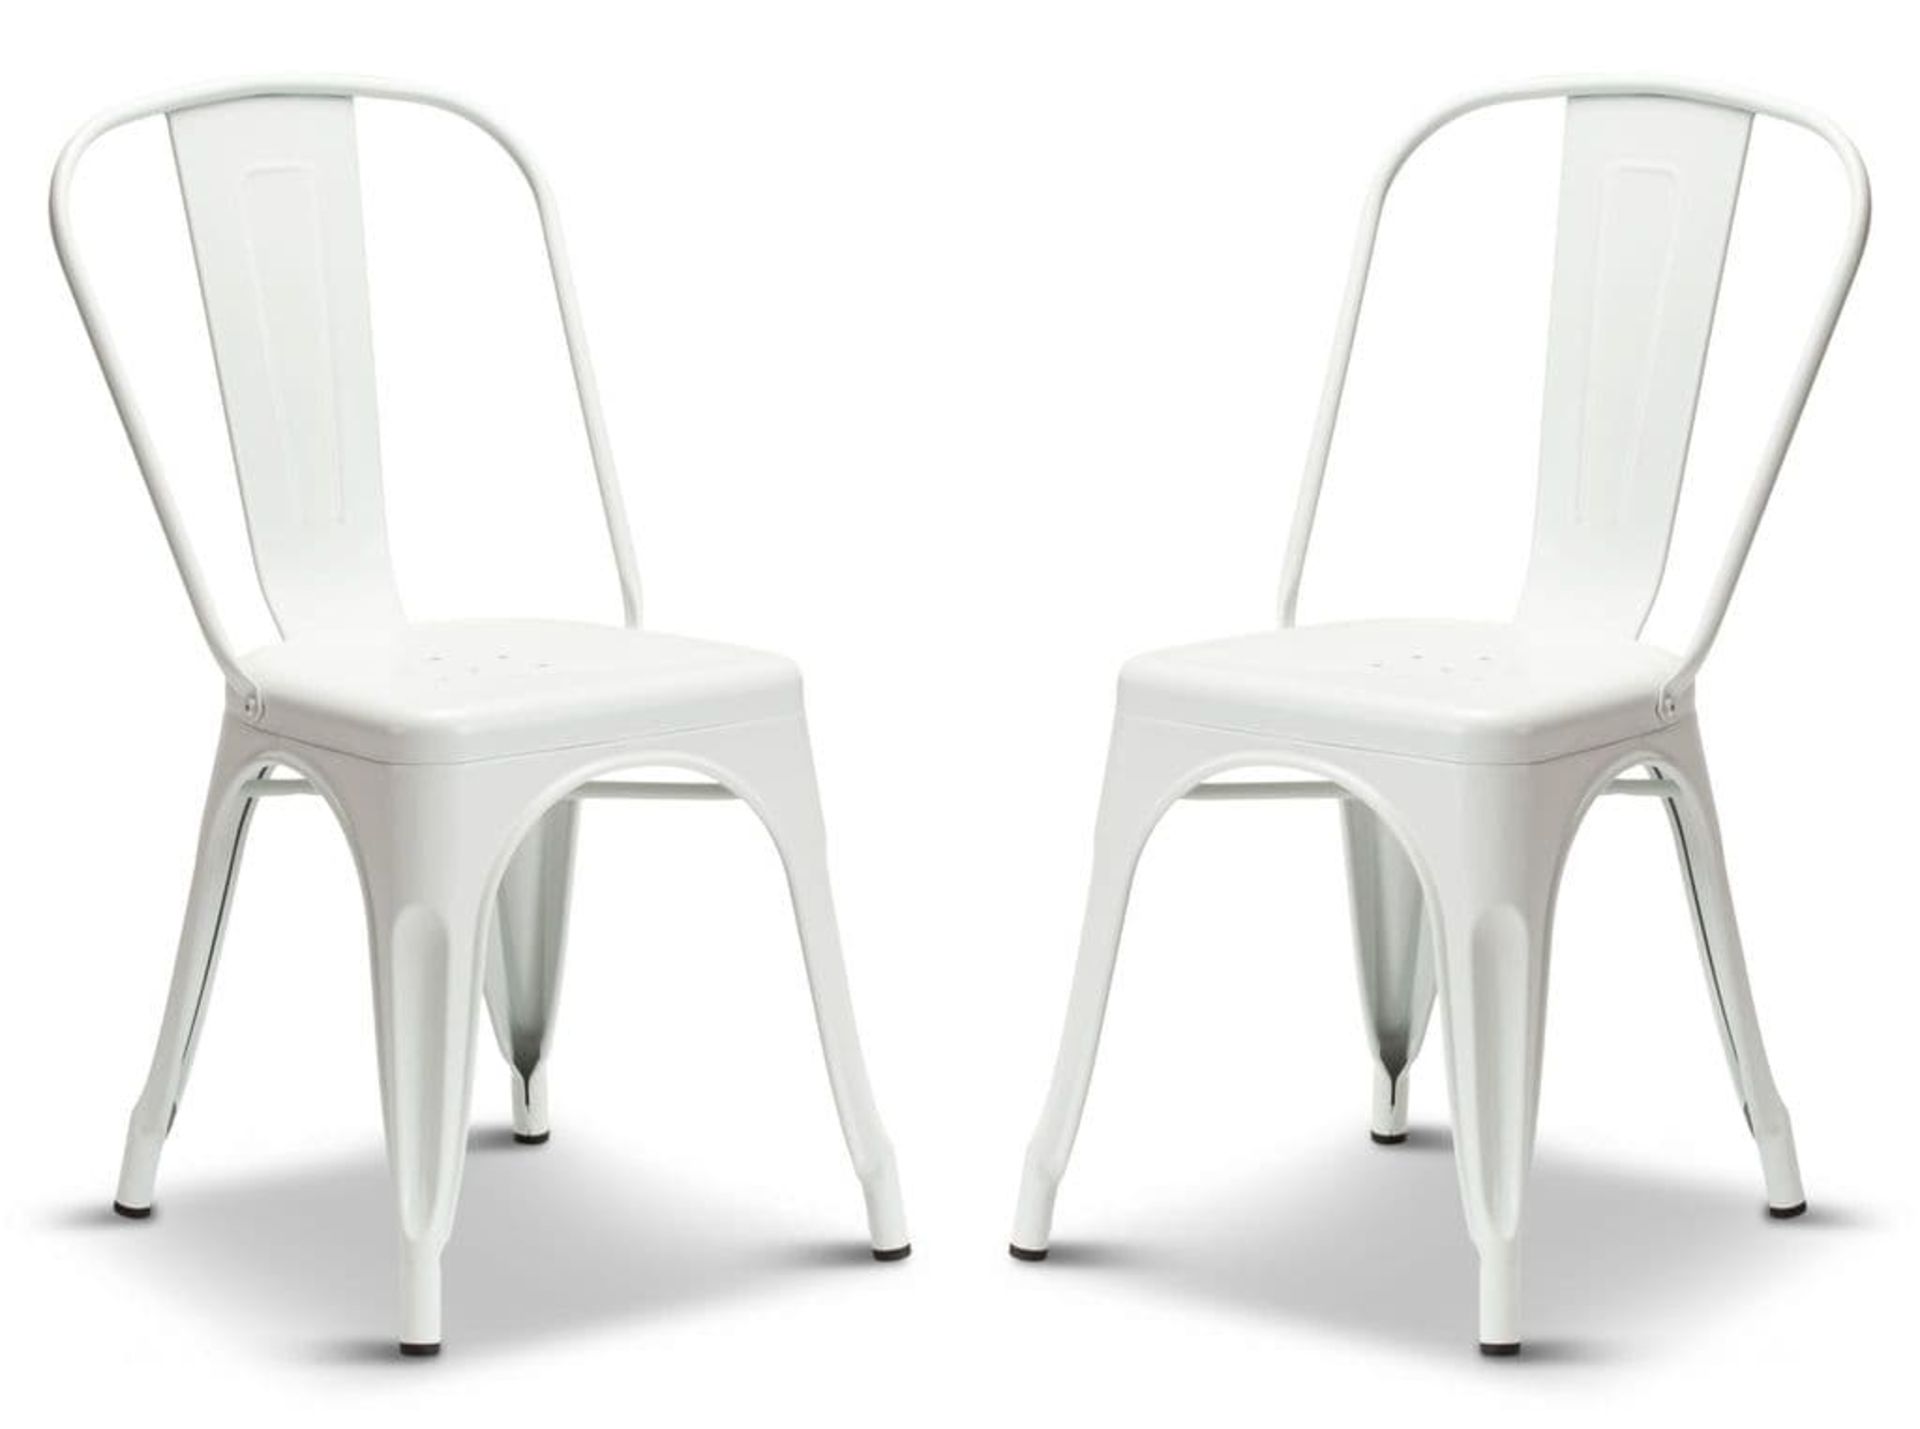 1 x Tolix Industrial Style Outdoor Bistro Table and Chair Set in White- Includes 1 x Table and 4 x - Image 9 of 12